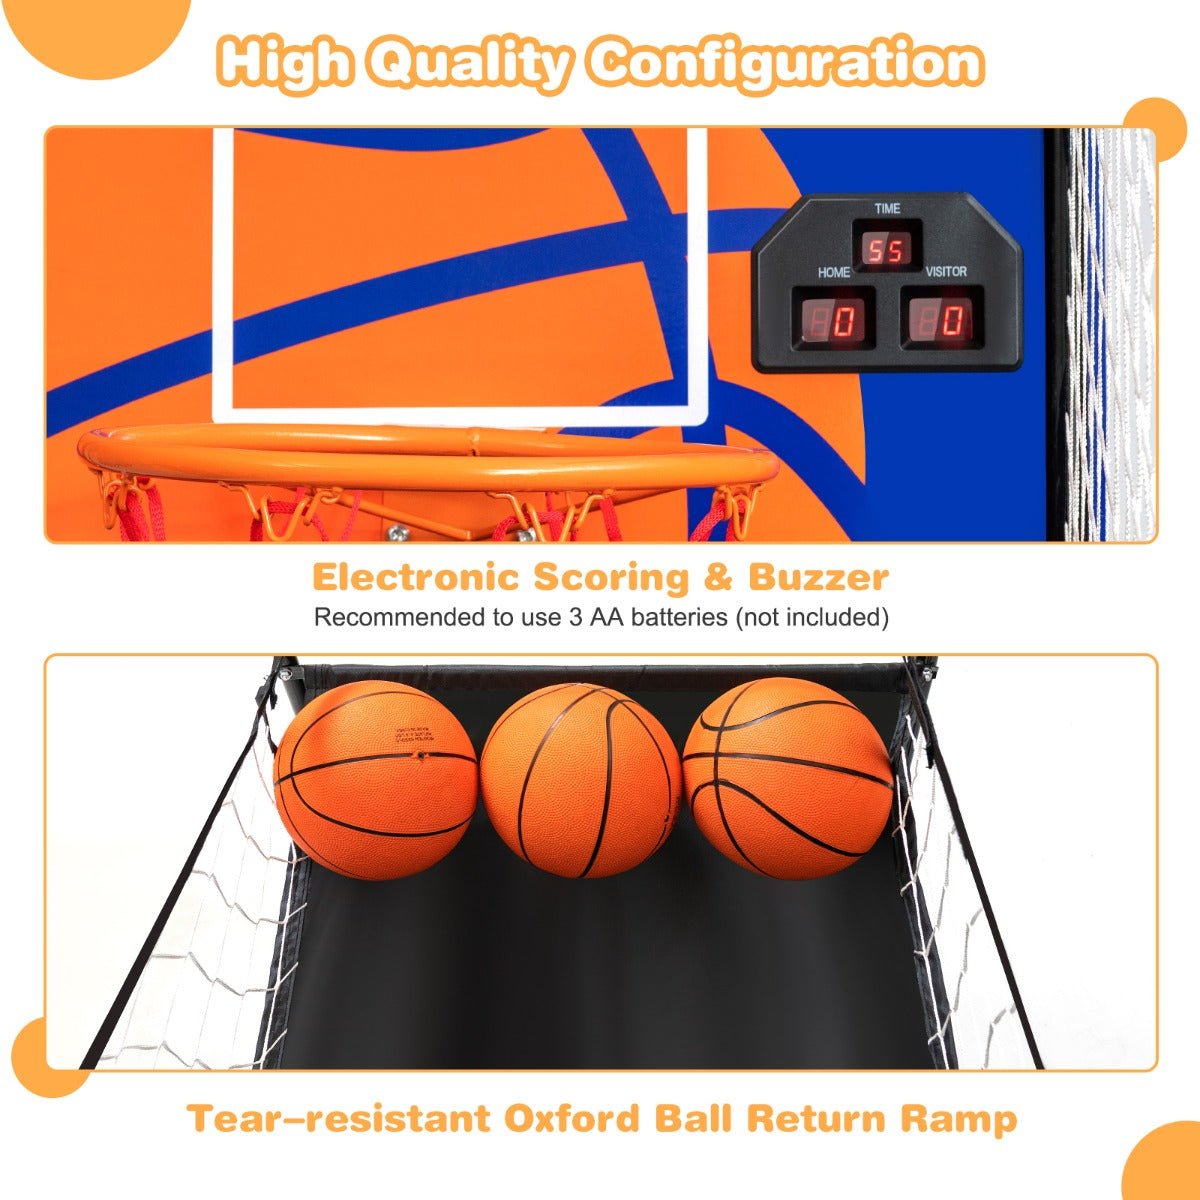 Portable Fun: Arcade Basketball Game with Electronic Scorer for All